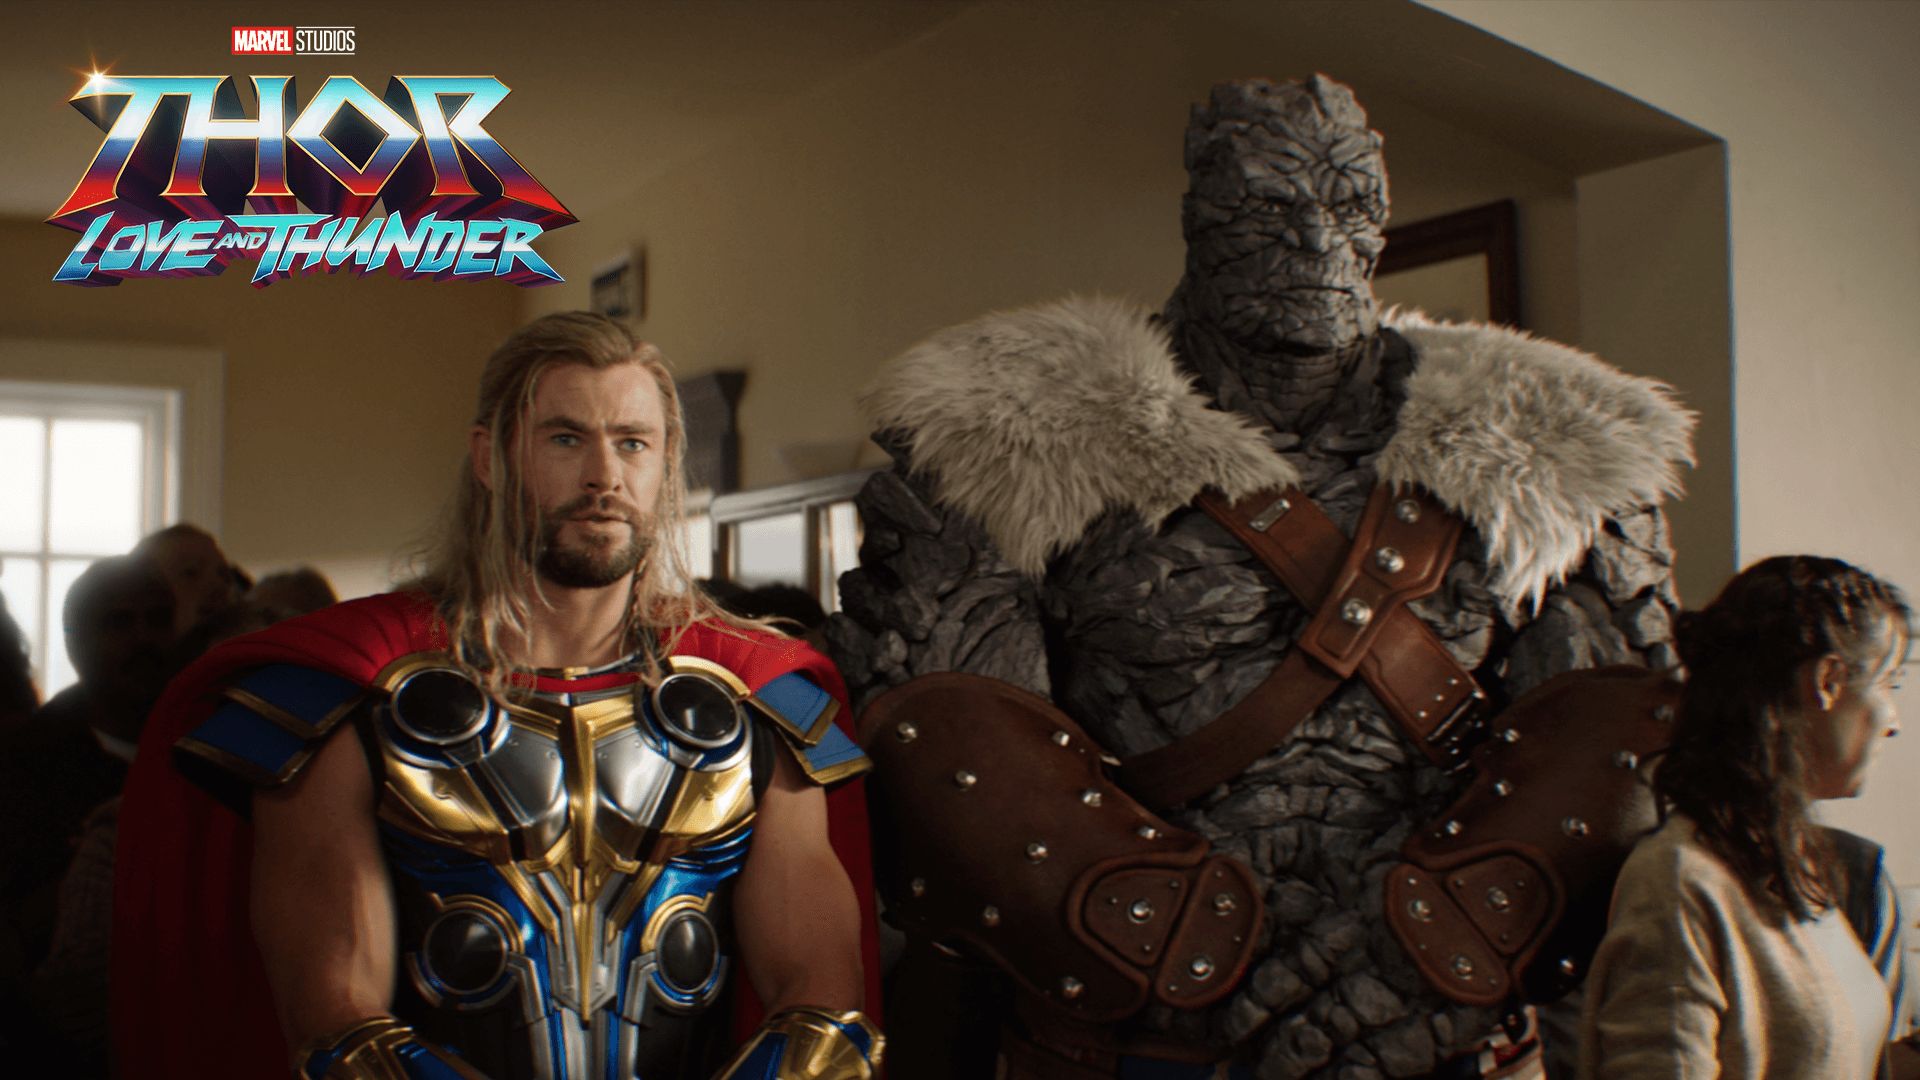 THOR LOVE AND THUNDER: TICKETS ON SALE